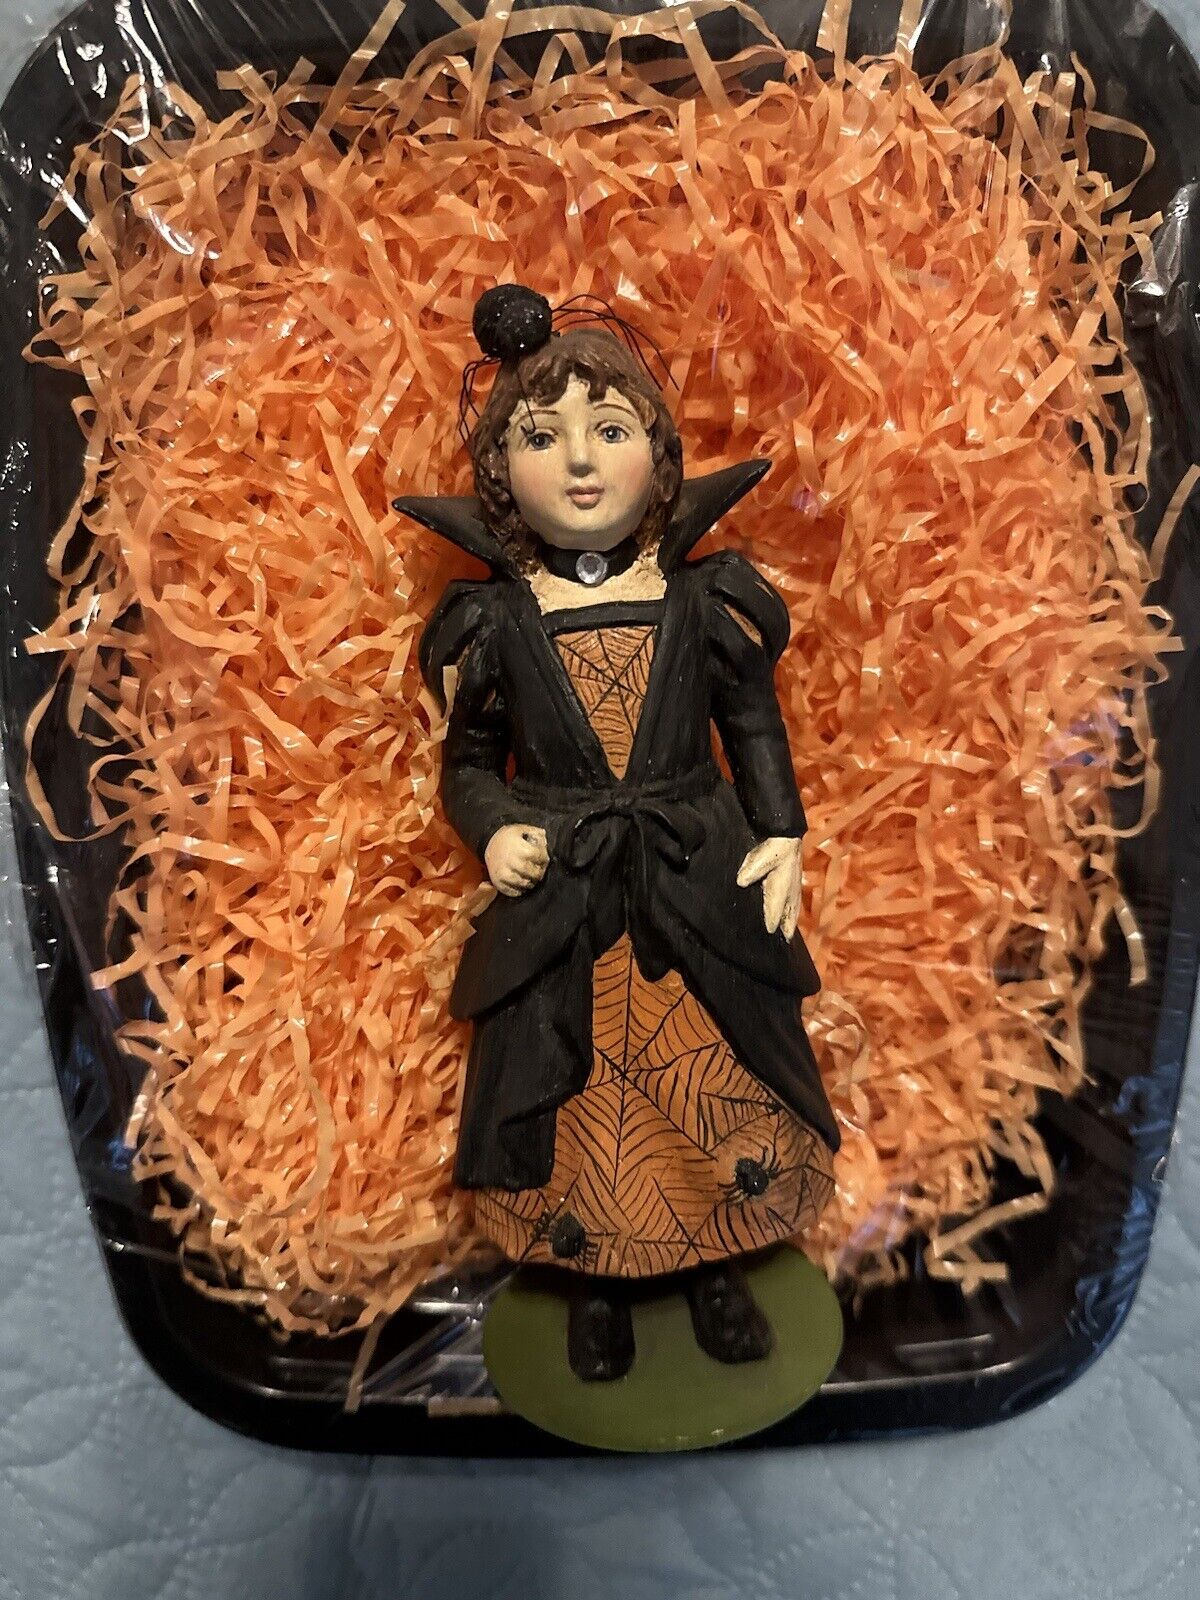 Vintage Bethany Lowe Halloween Spider Queen Girl Witch Figurine Retired 2013